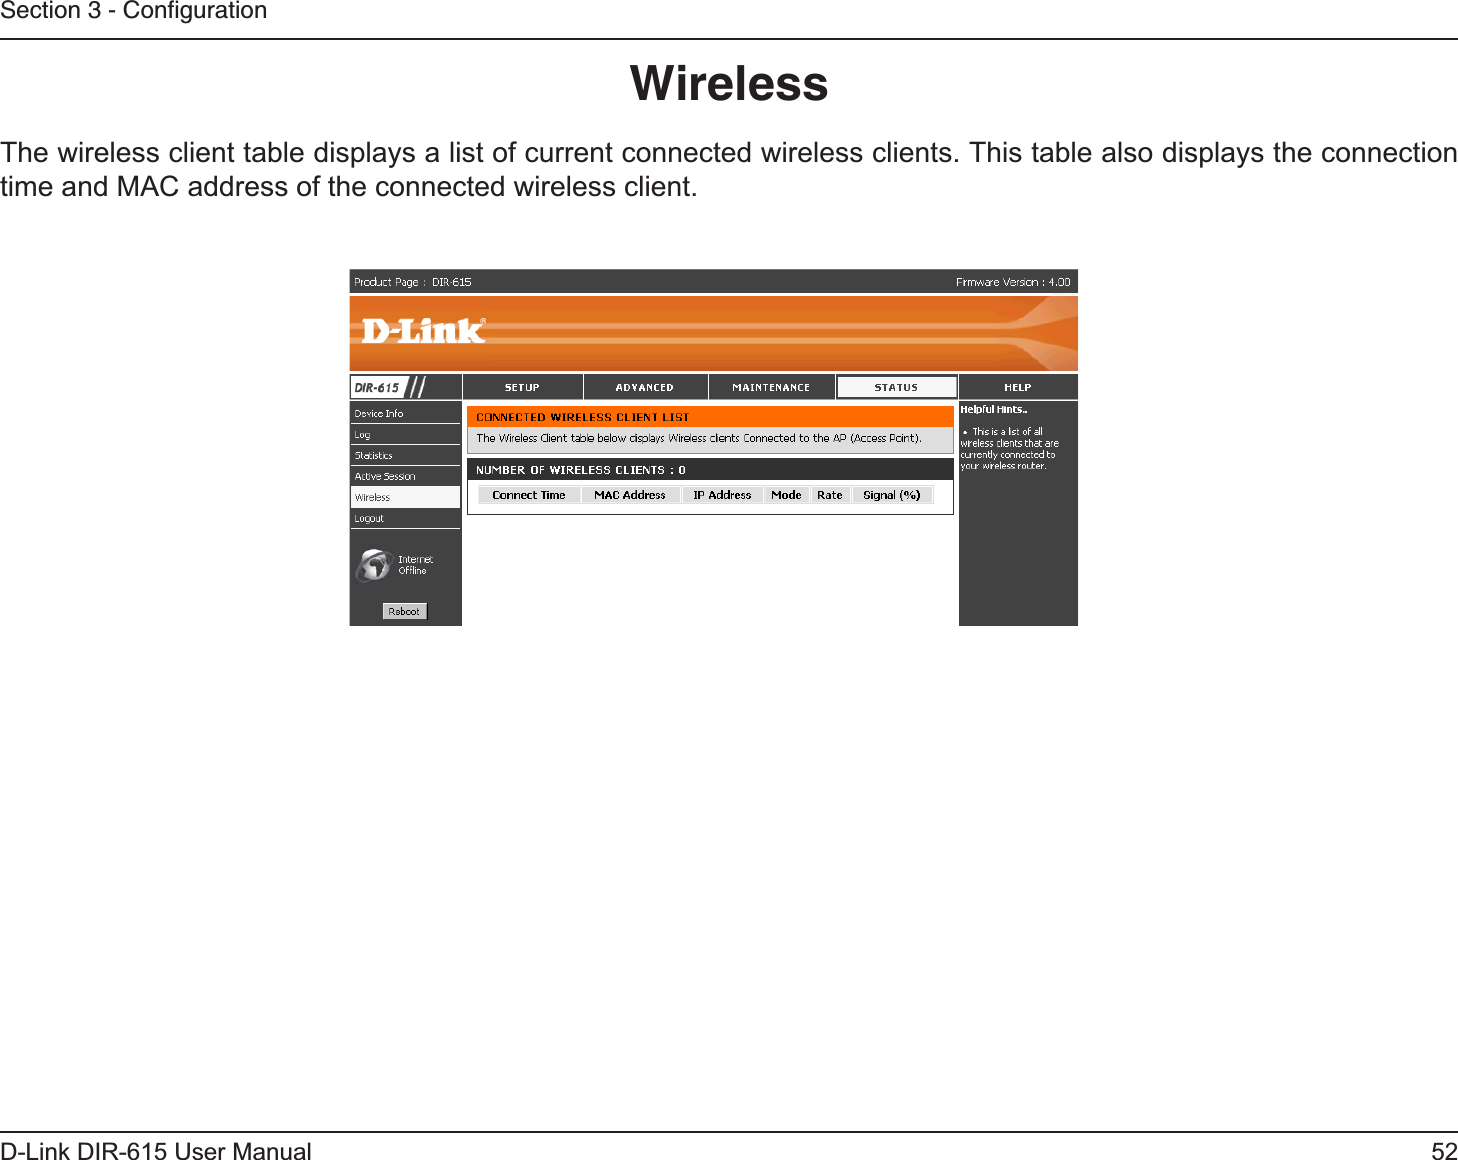 52D-Link DIR-615 User ManualSection 3 - ConﬁgurationWirelessThe wireless client table displays a list of current connected wireless clients. This table also displays the connection time and MAC address of the connected wireless client.